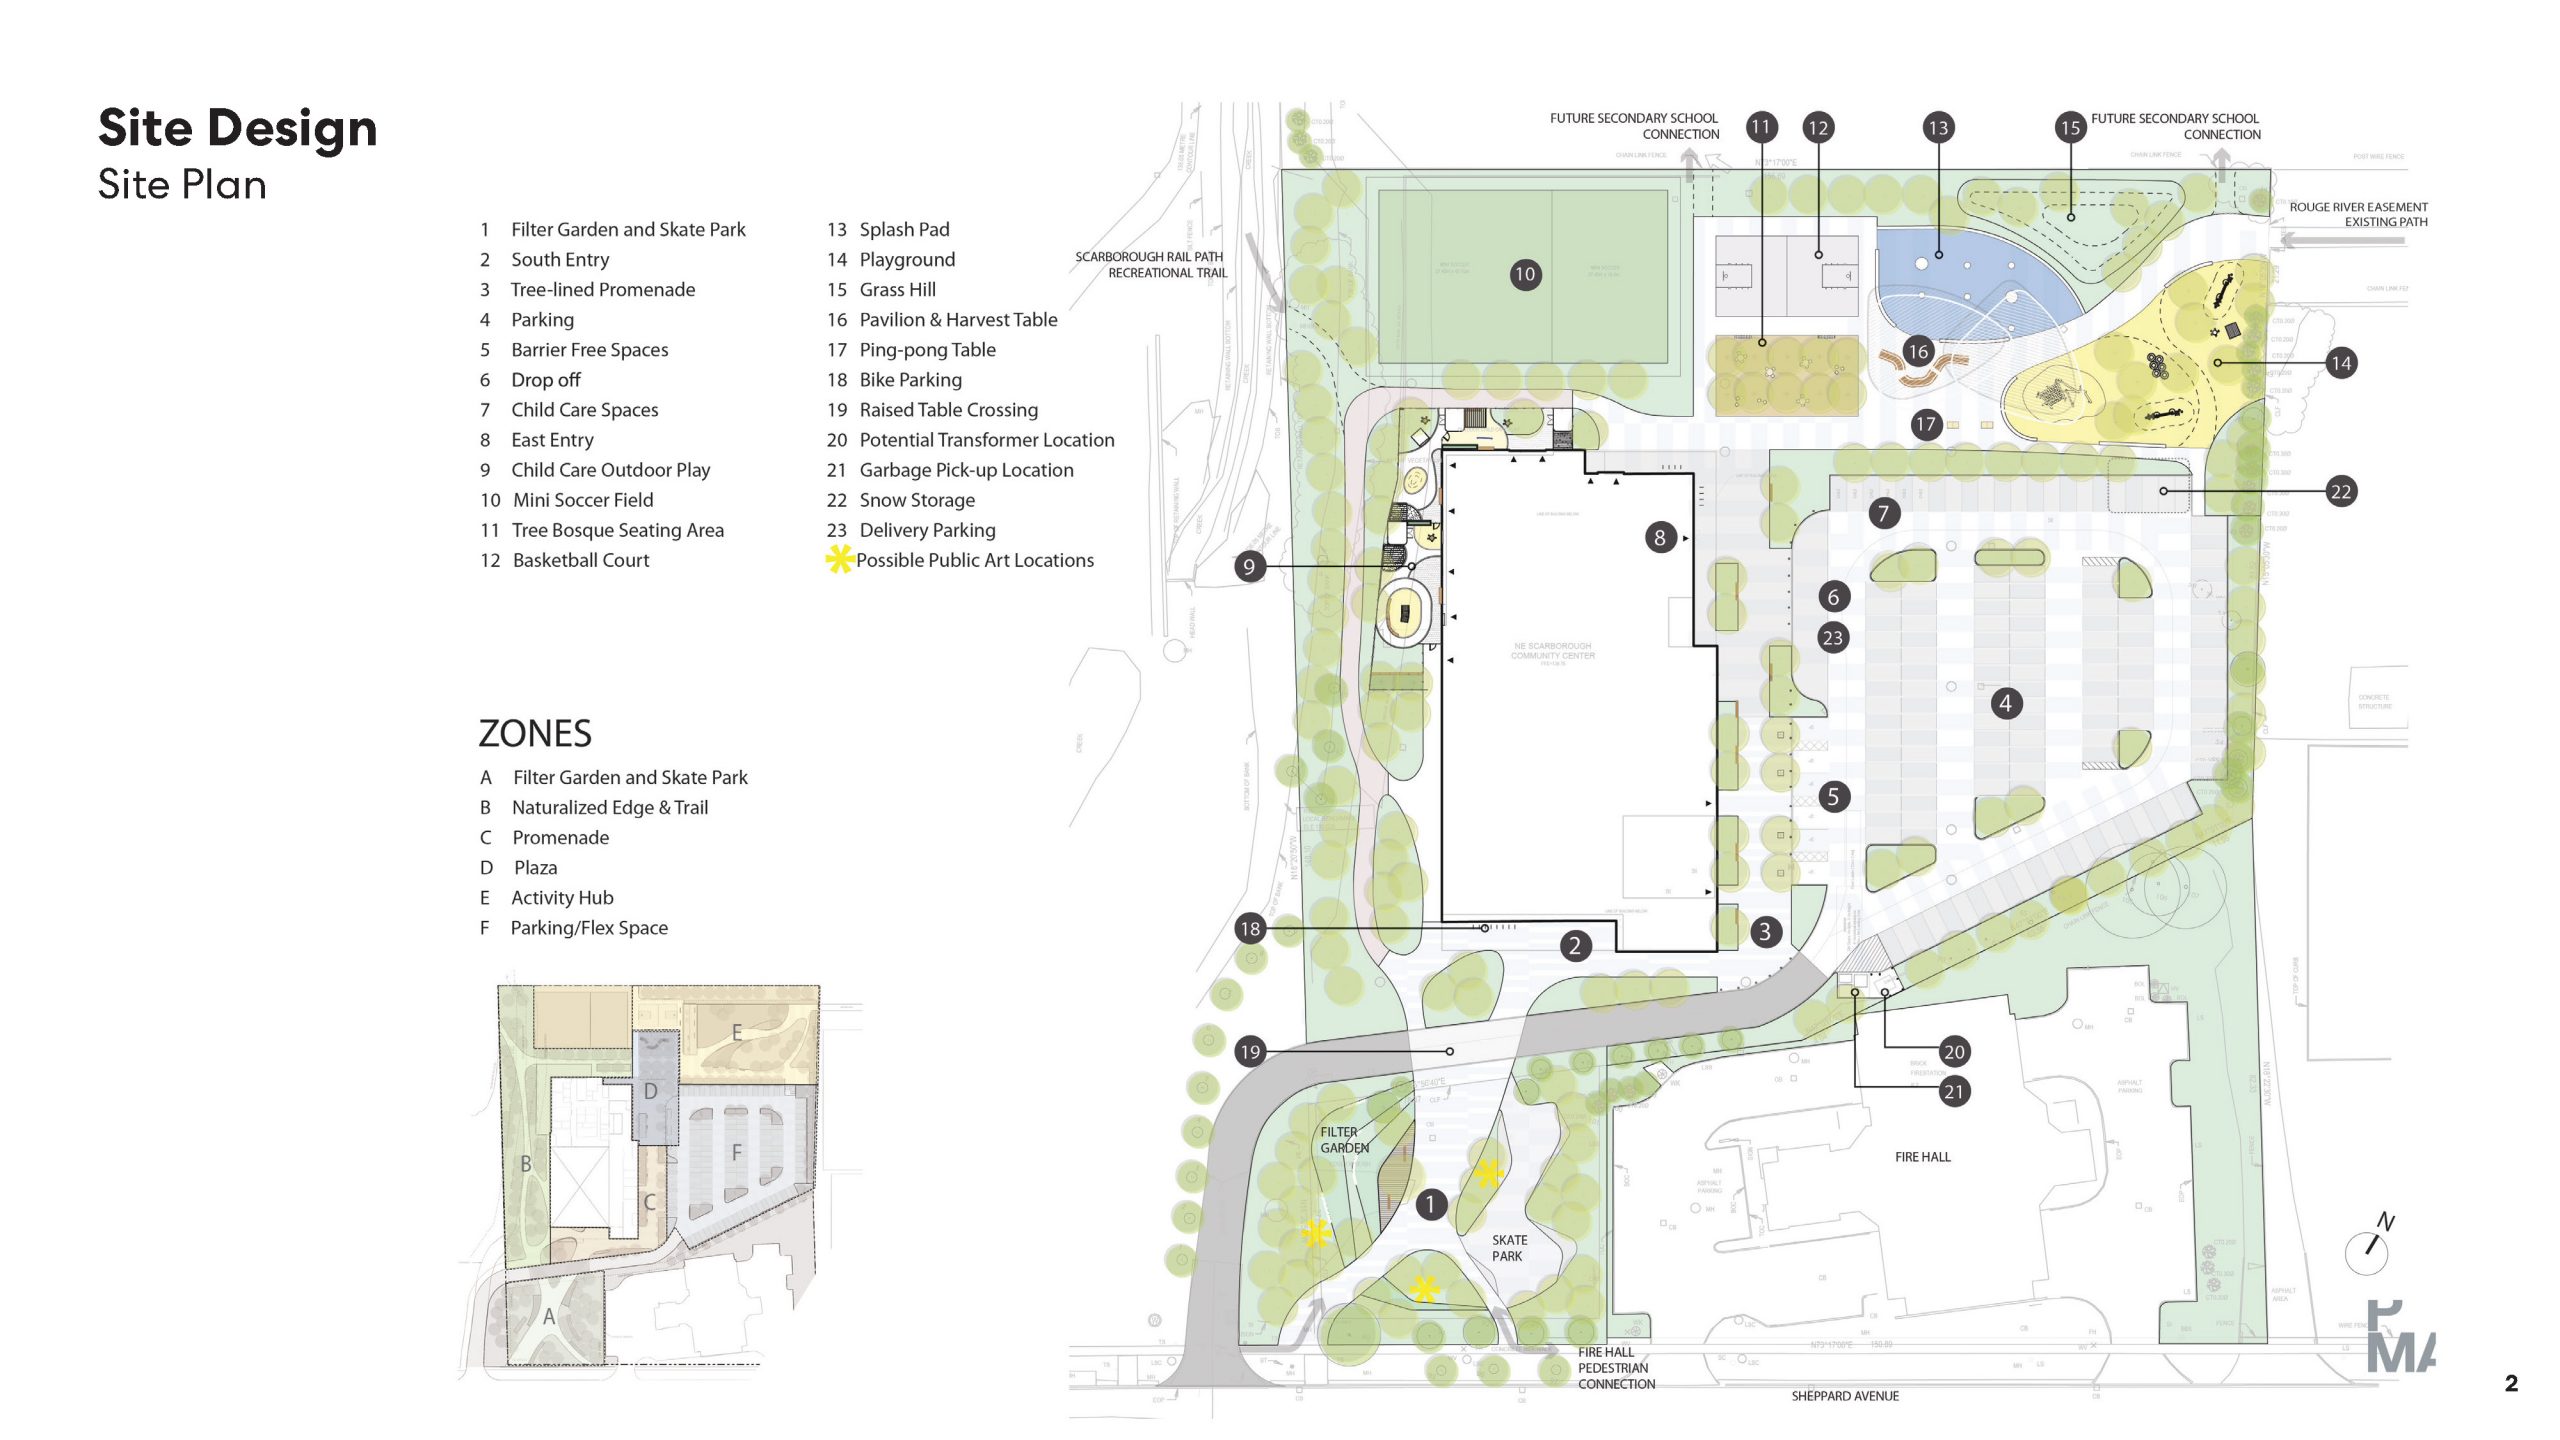 The site plan for the facility and park, with the recreational trail on the West, activity hub on the North, parking and Rouge River pathway on the East, and filter garden and skate park on the South, along Sheppard Avenue